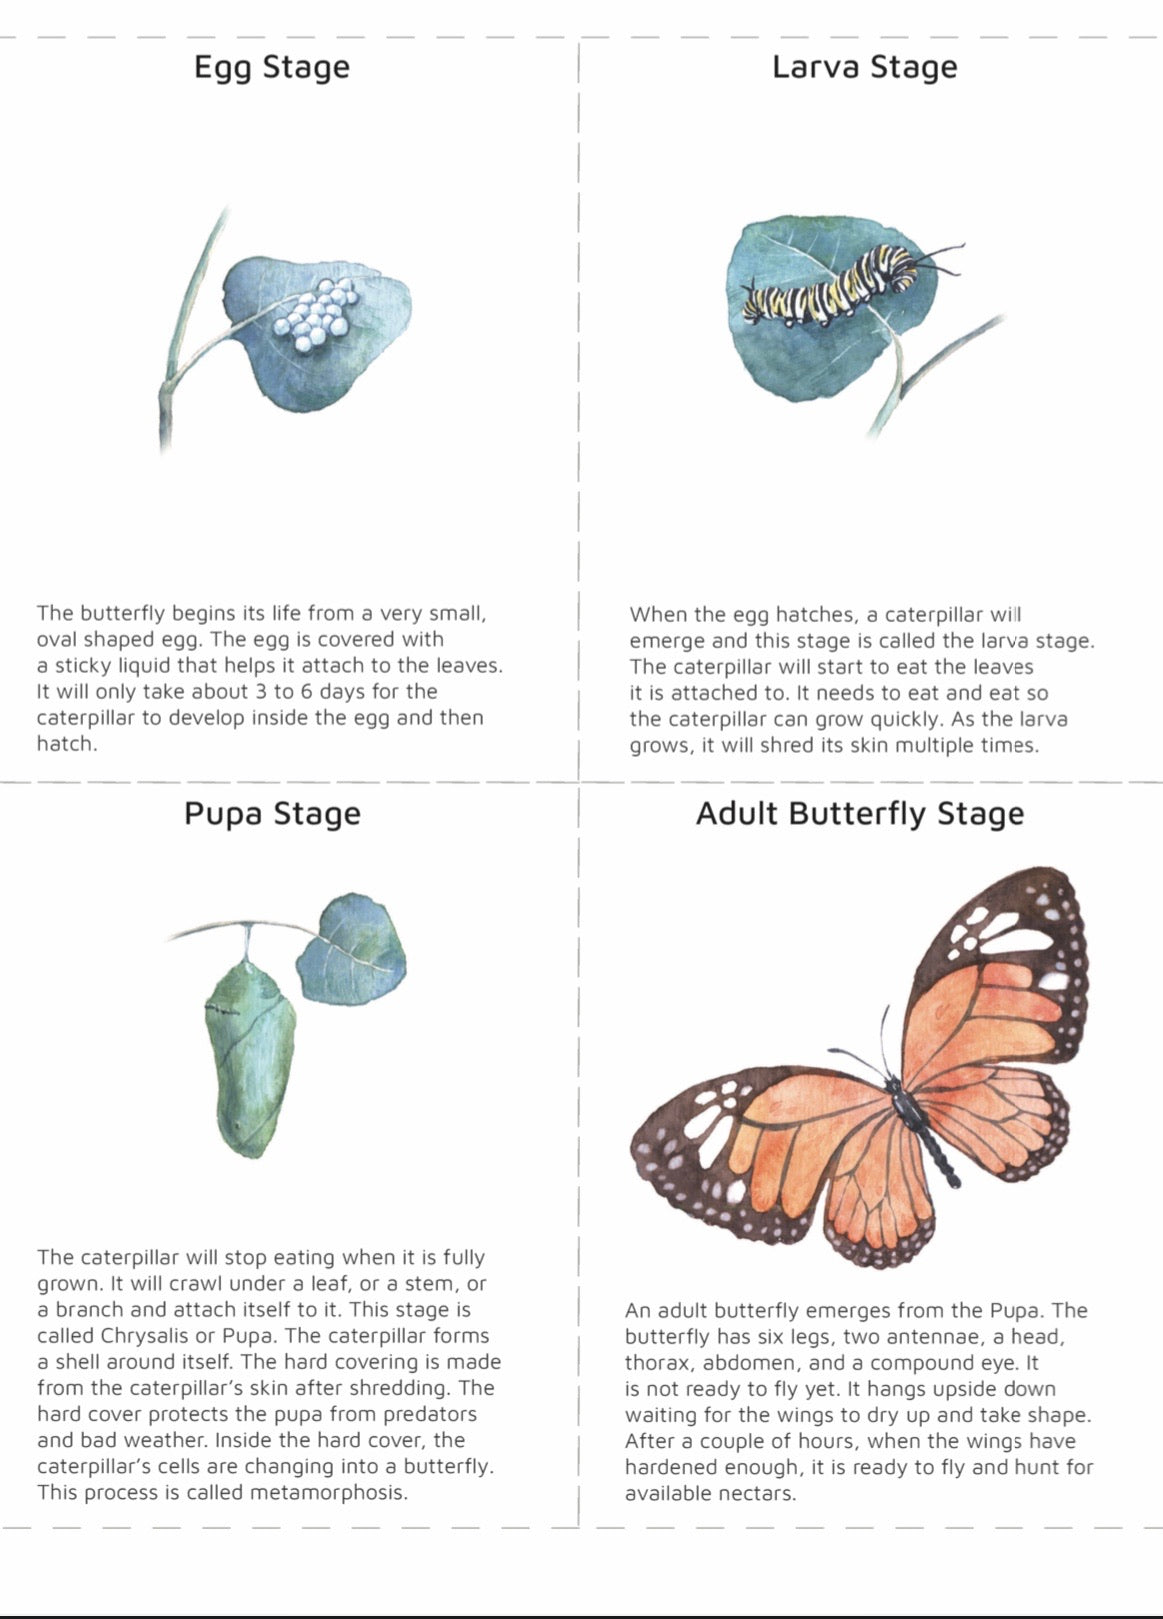 Butterfly Lifecycle (pdf download only)